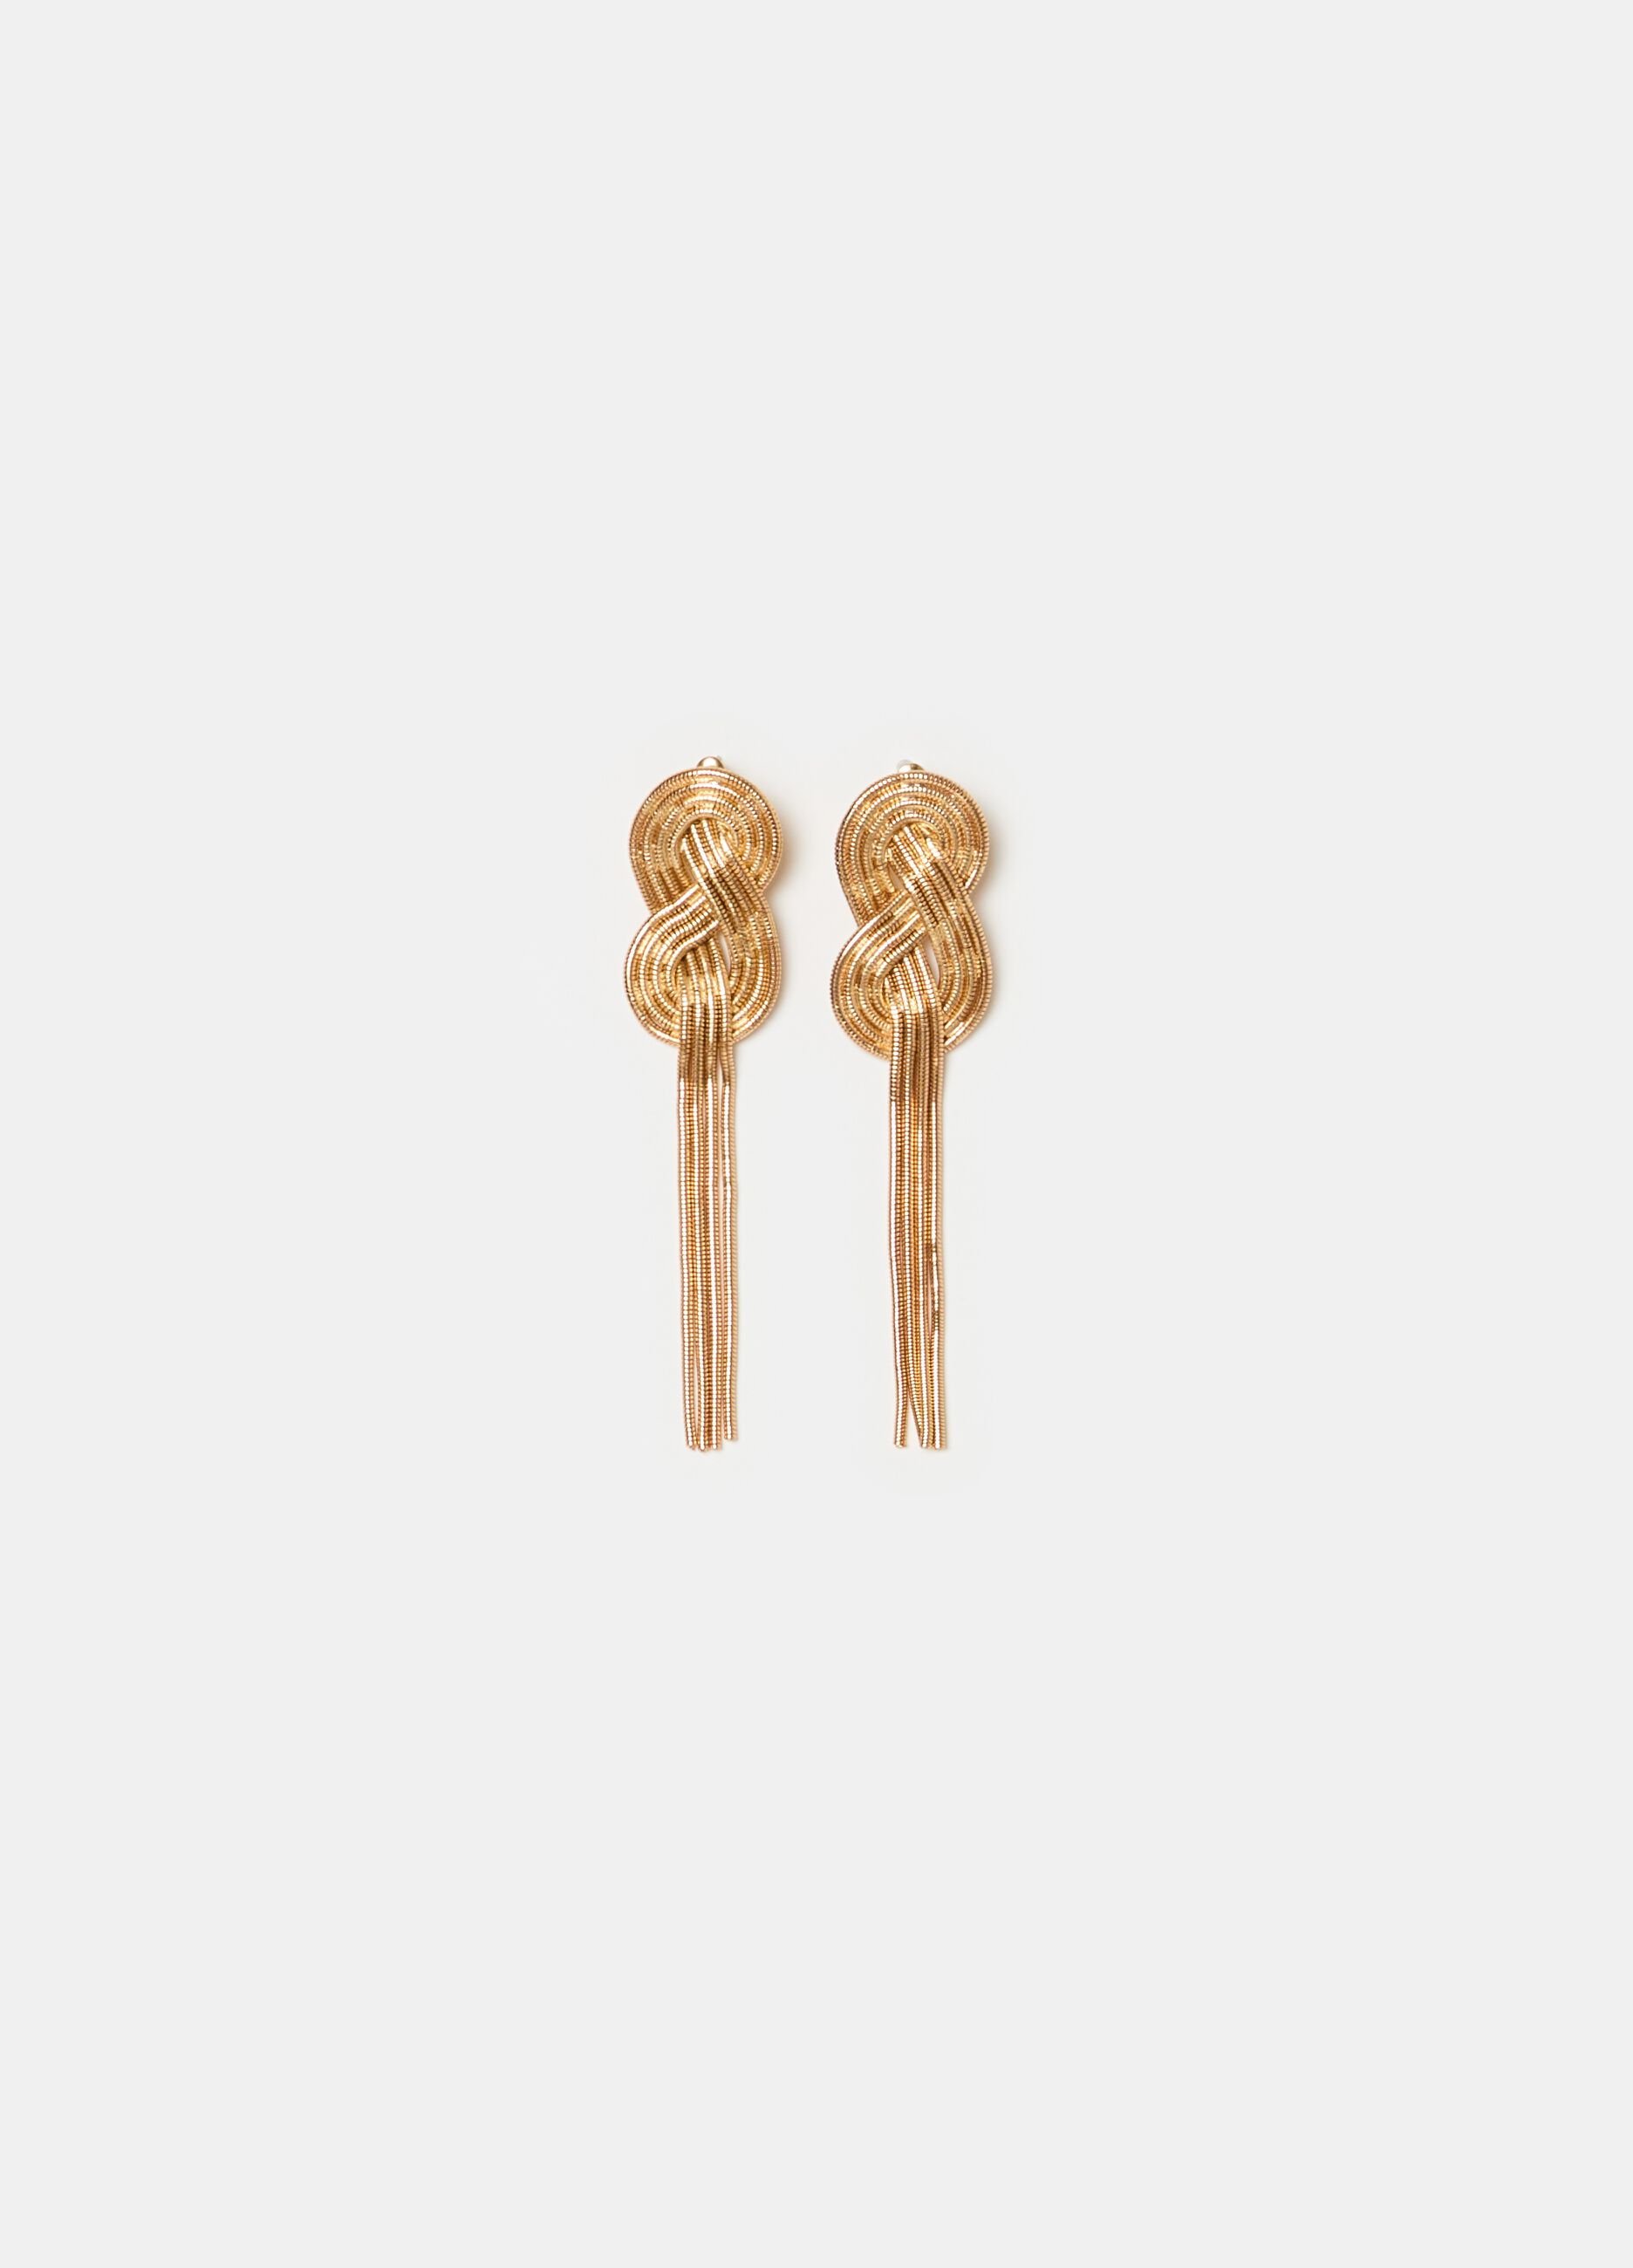 Cascade earrings with knot